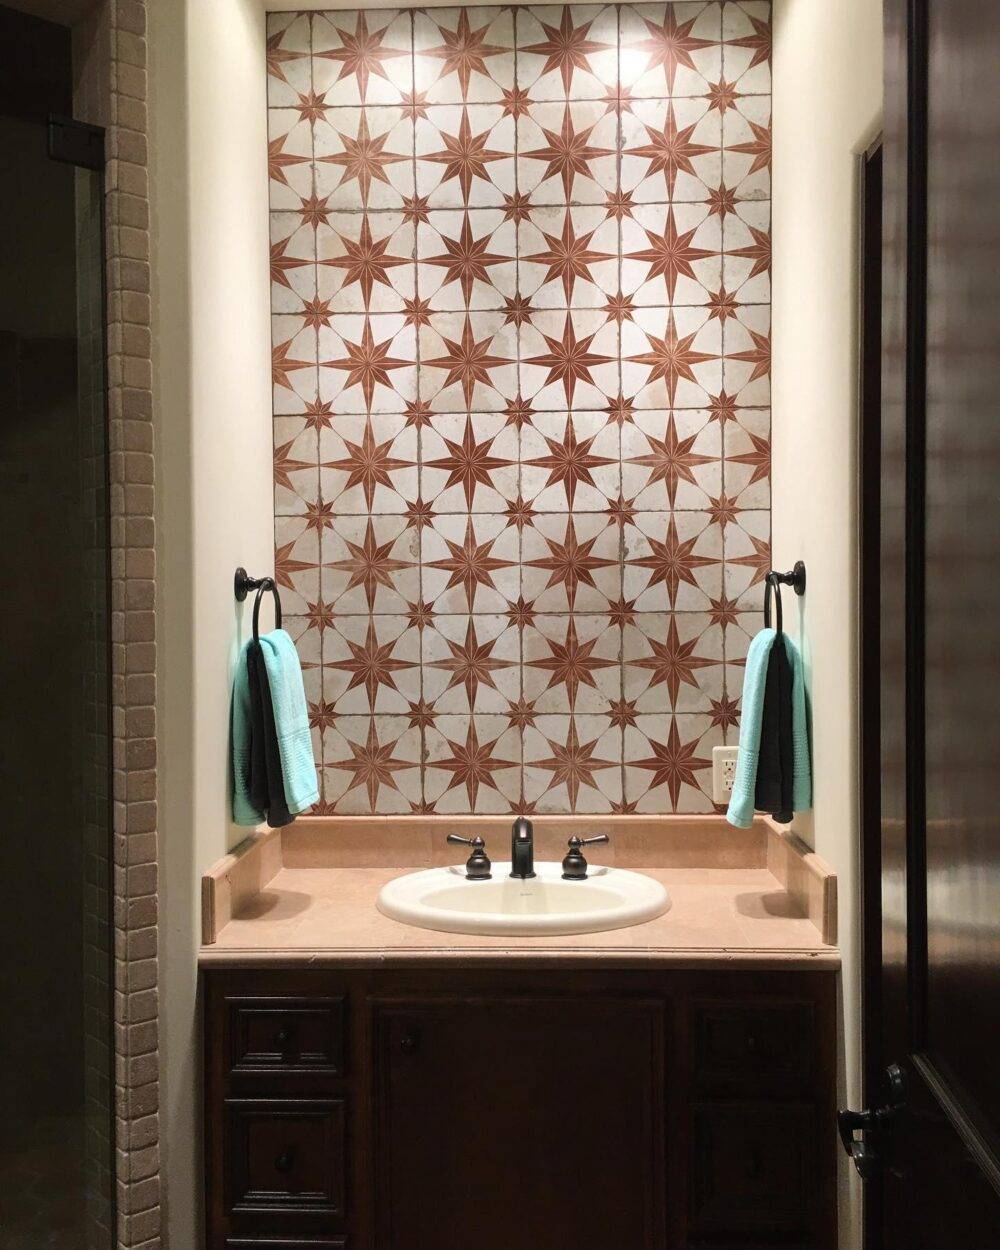 Sink area with orange star-patterned tile wall